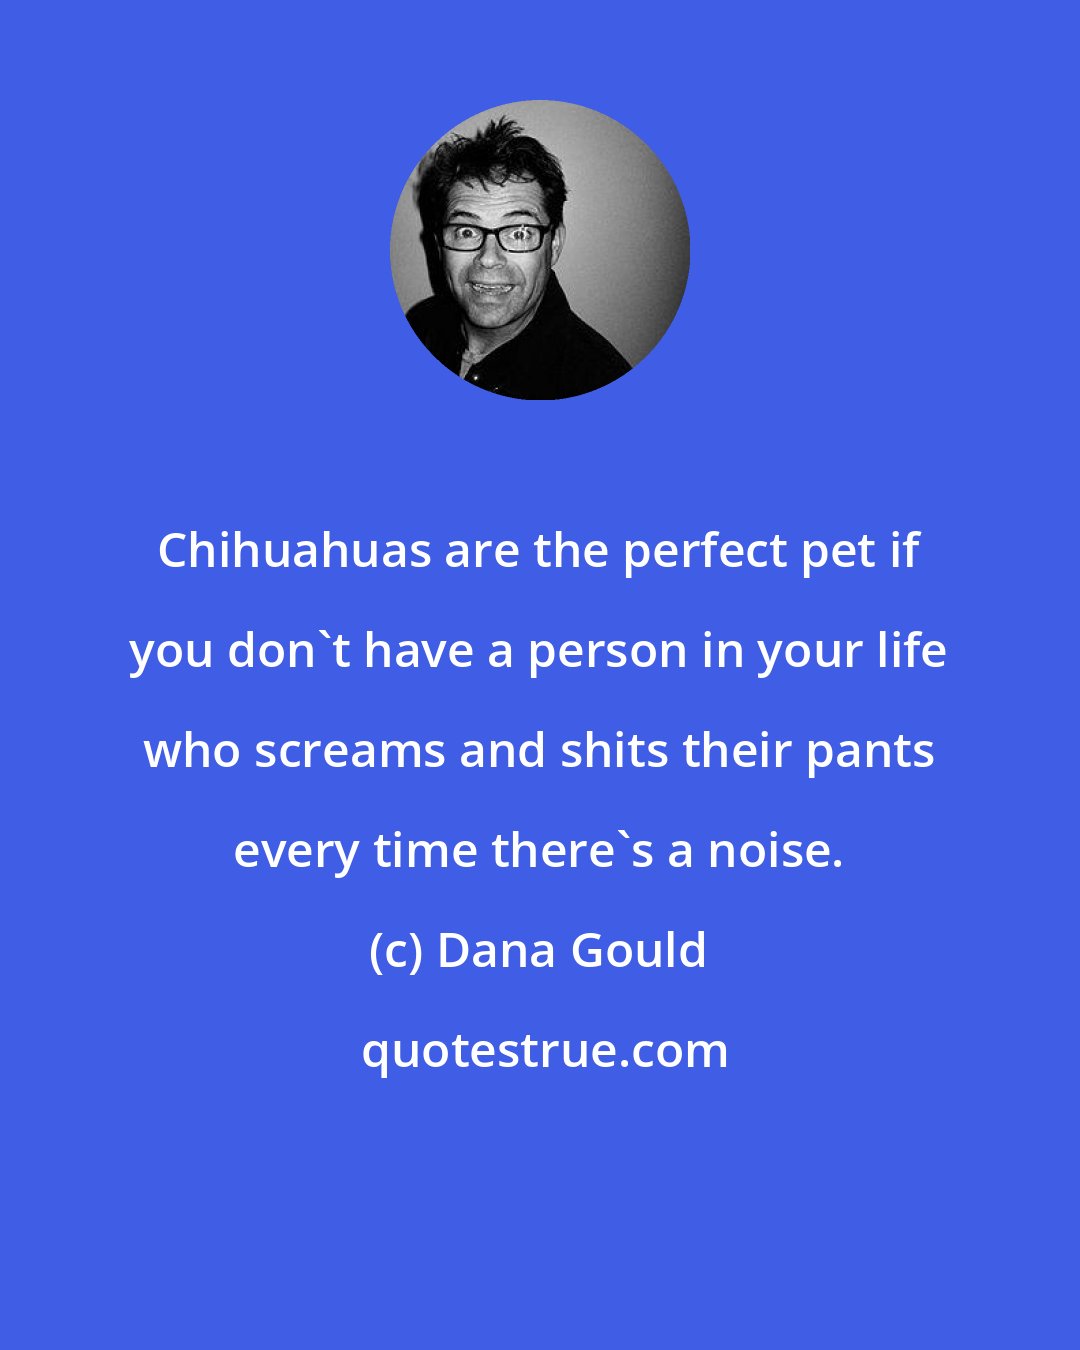 Dana Gould: Chihuahuas are the perfect pet if you don't have a person in your life who screams and shits their pants every time there's a noise.